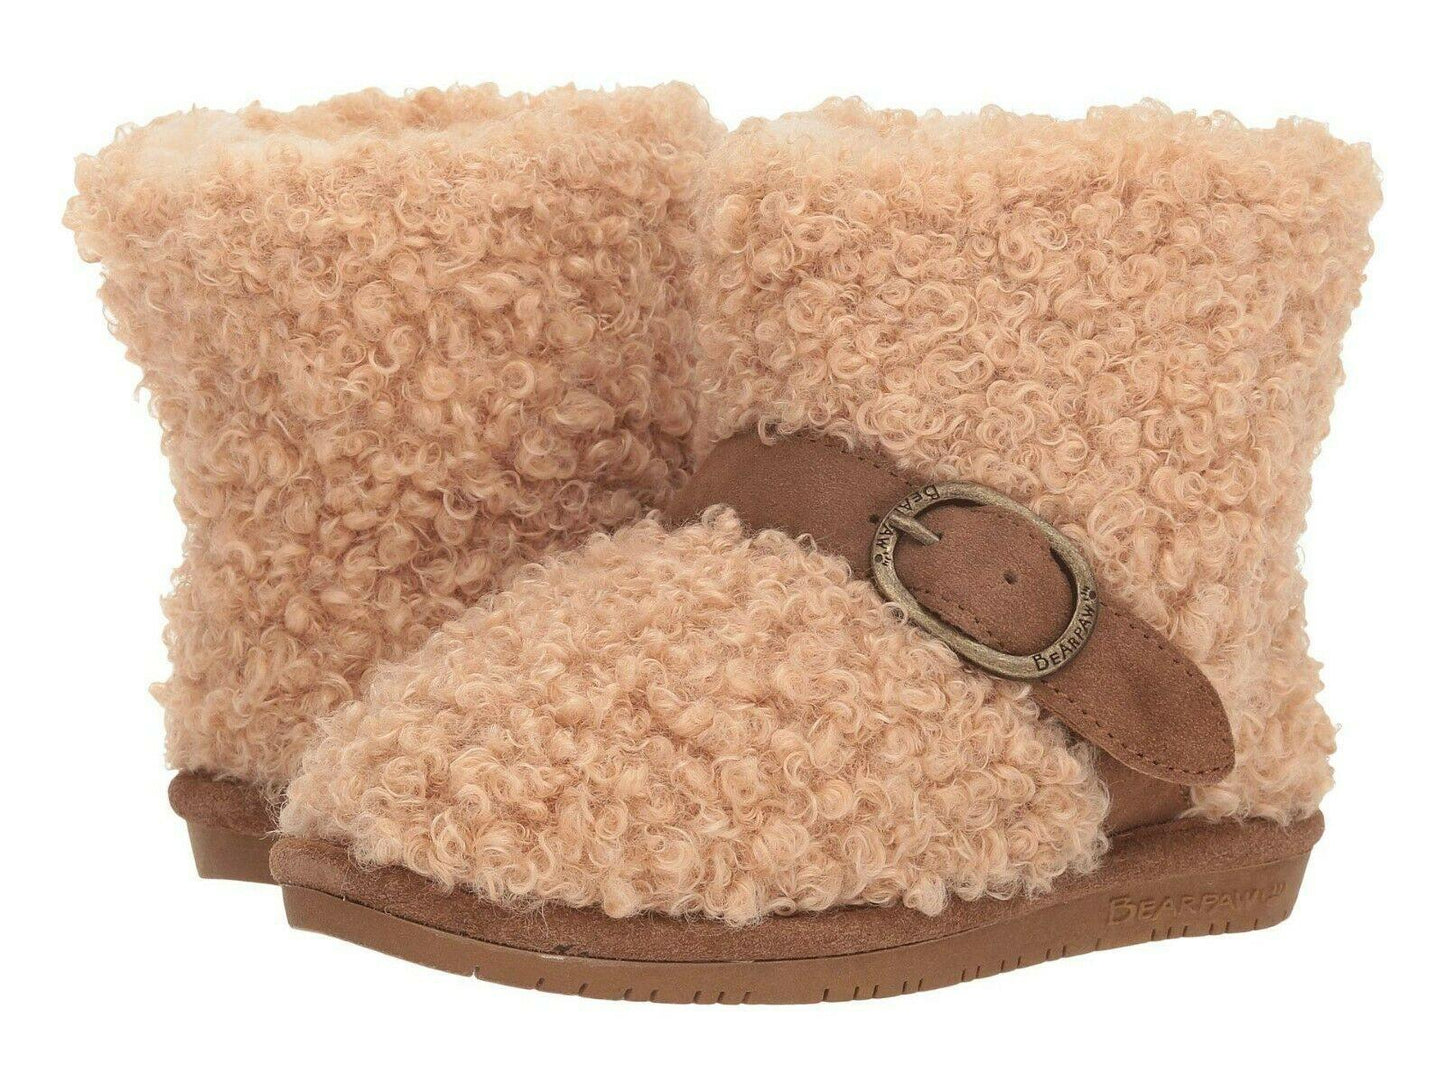 Bearpaw Treasure Taupe Comfortable Wool Blend Winter Girls Boots 3 Little Kid - SVNYFancy